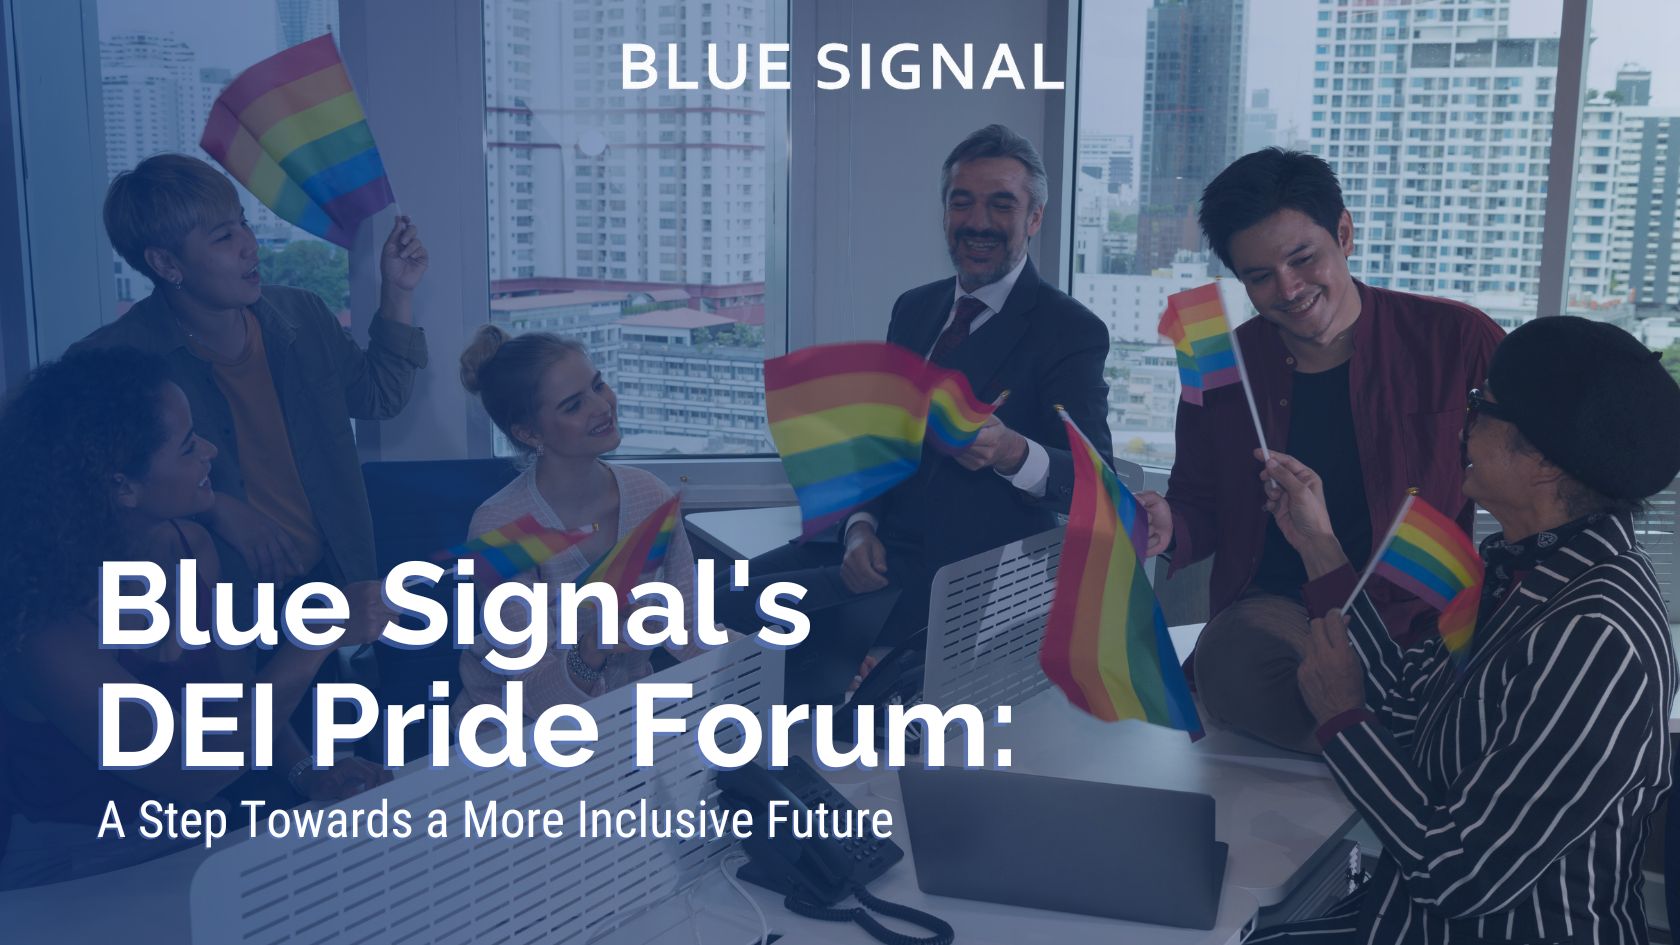 Group of employees celebrating DEI Pride Forum by waving rainbow flags in the office